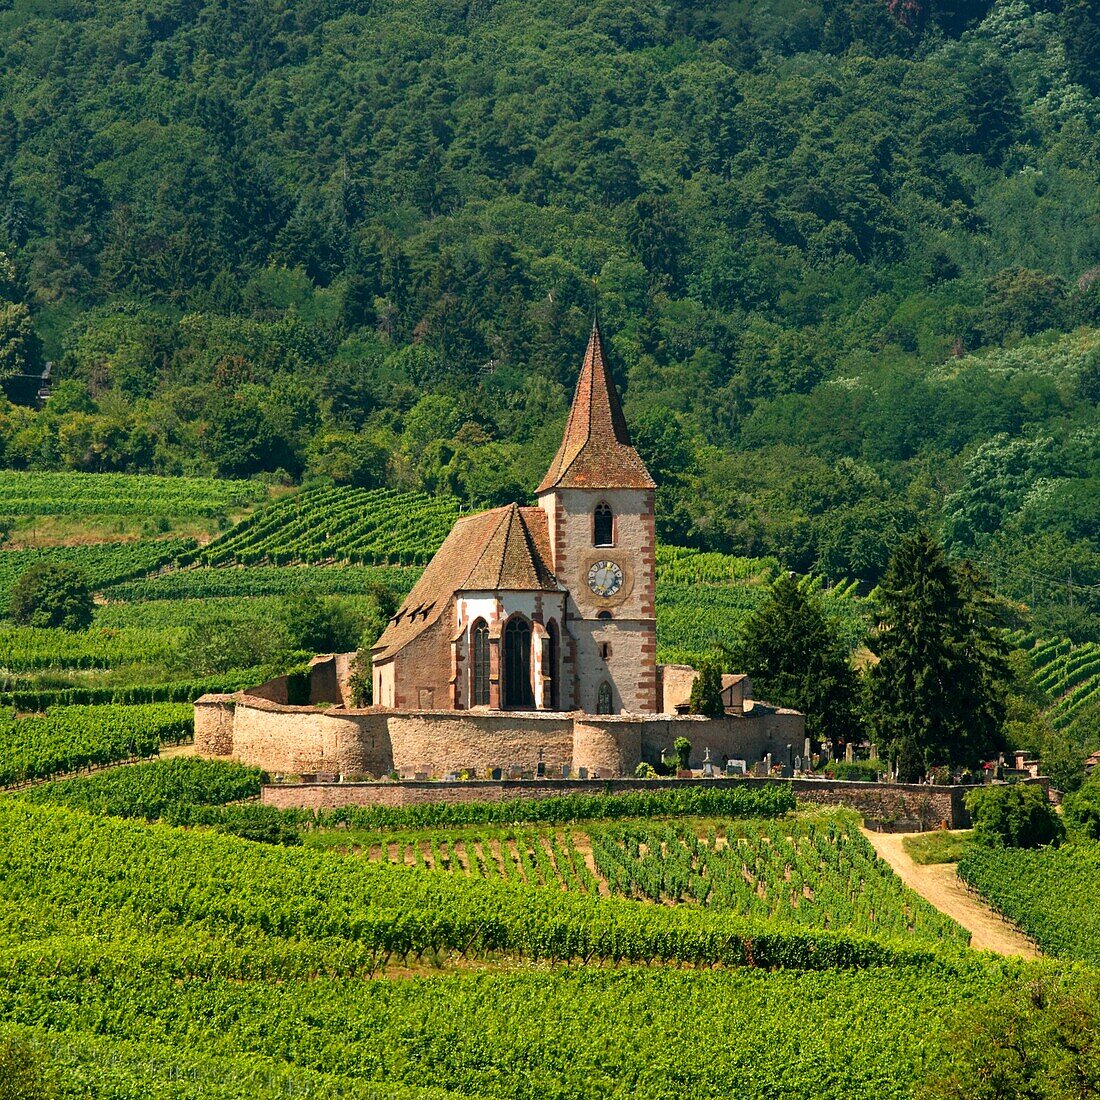 France, Haut Rhin, the Alsace Wine Route, Hunawihr, labelled Les Plus Beaux Villages de France (The Most Beautiful Villages of France), Vineyard and St Hune church\n